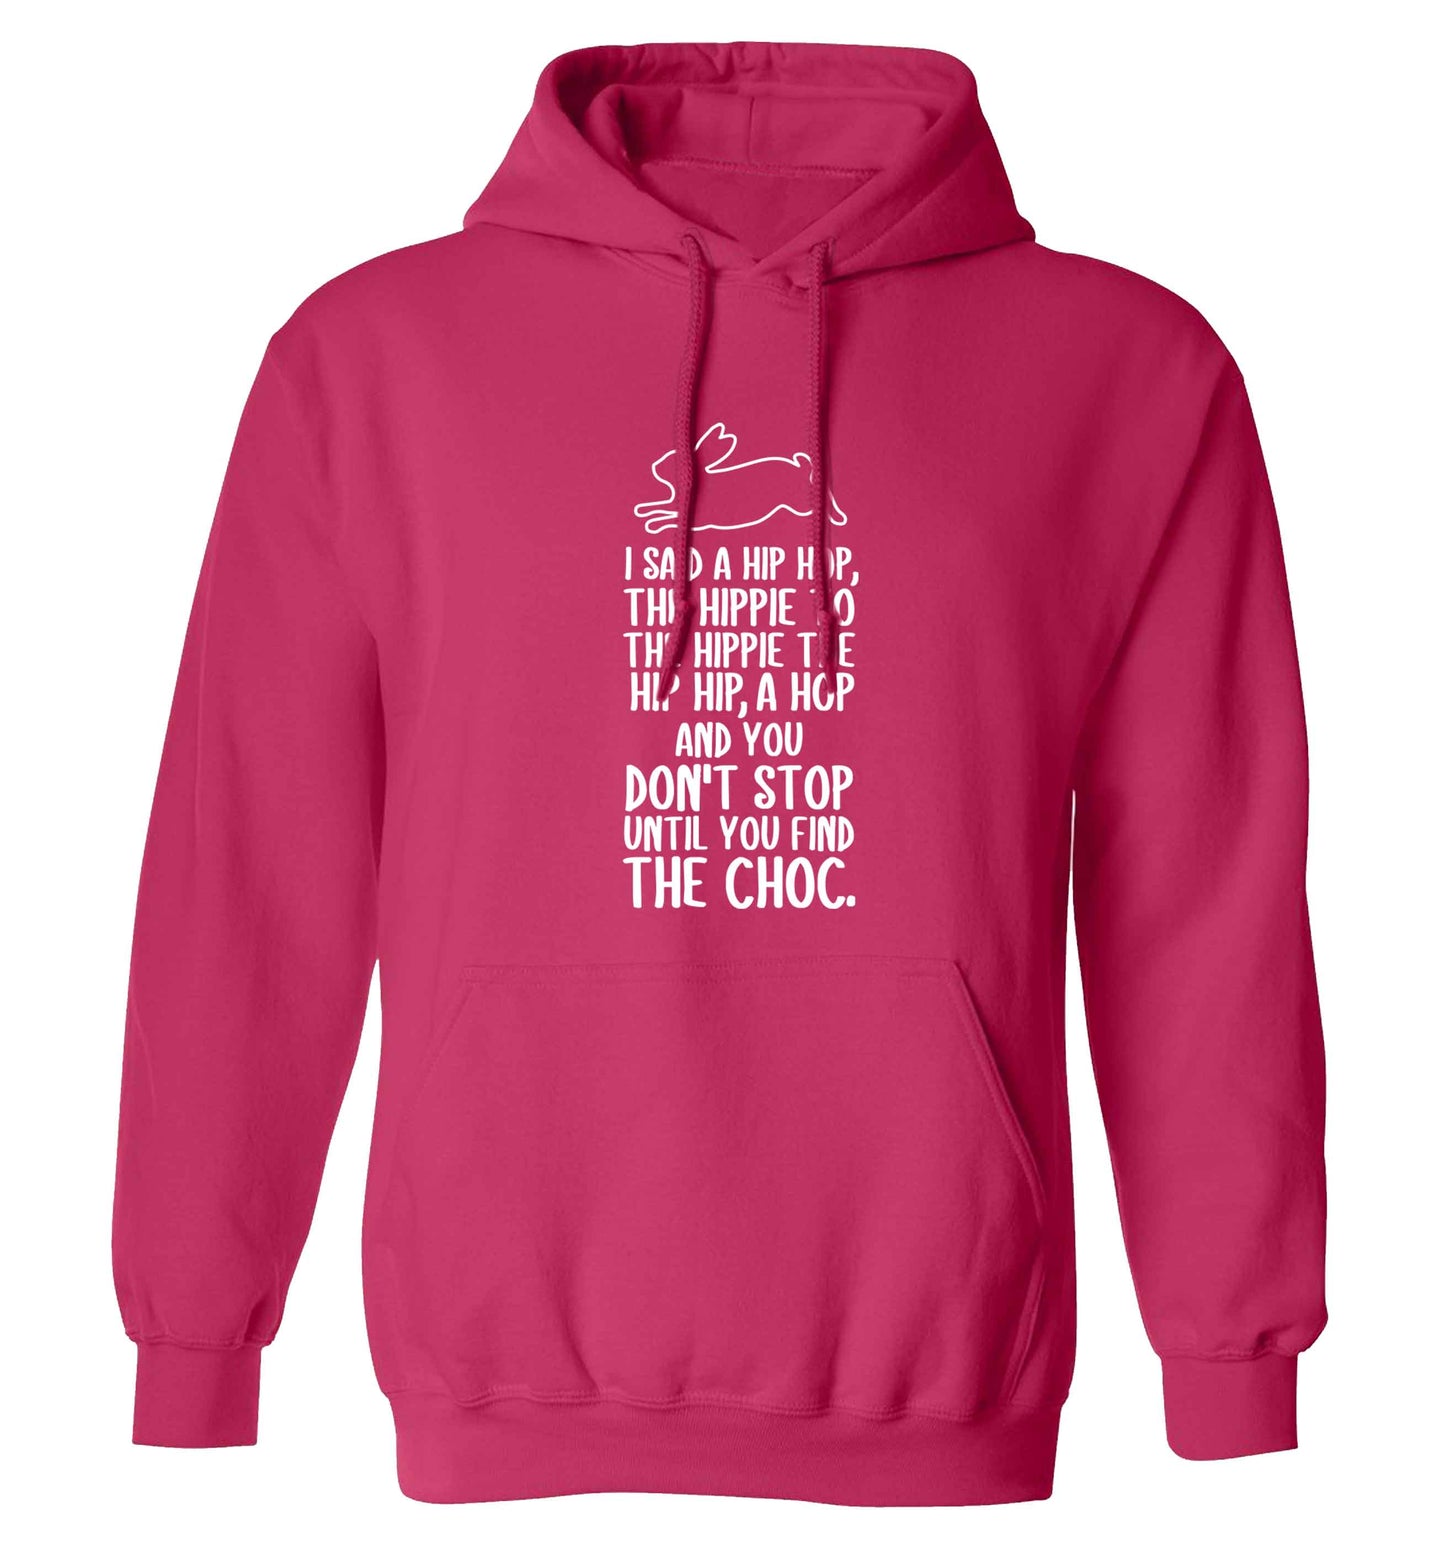 Don't stop until you find the choc adults unisex pink hoodie 2XL